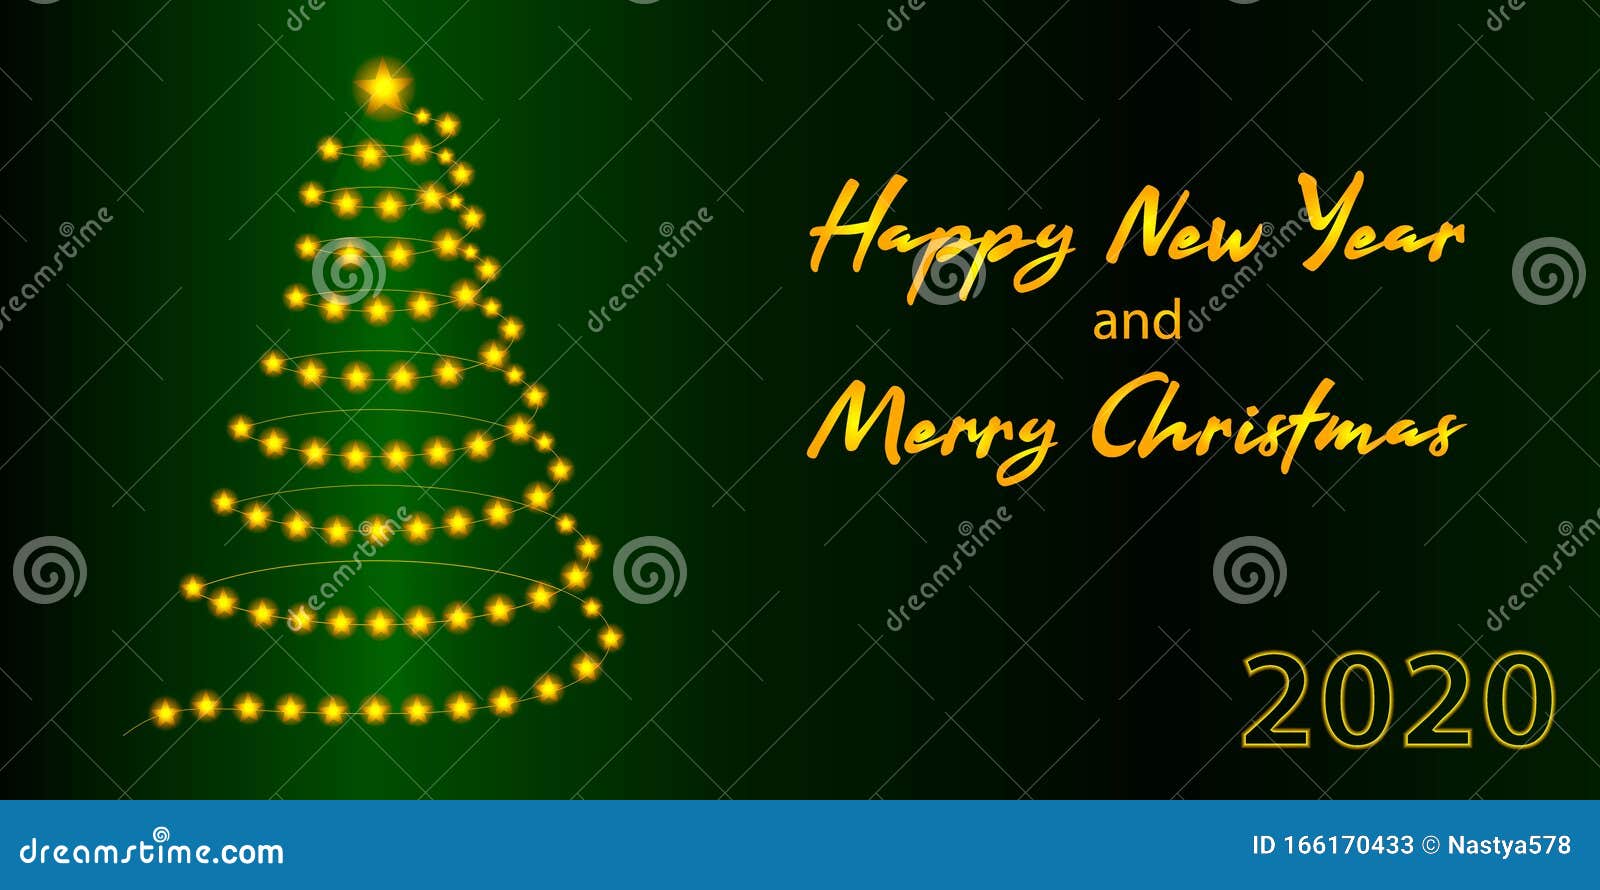 Beautiful Happy New Year and Marry Christmas Card 2020 with ...